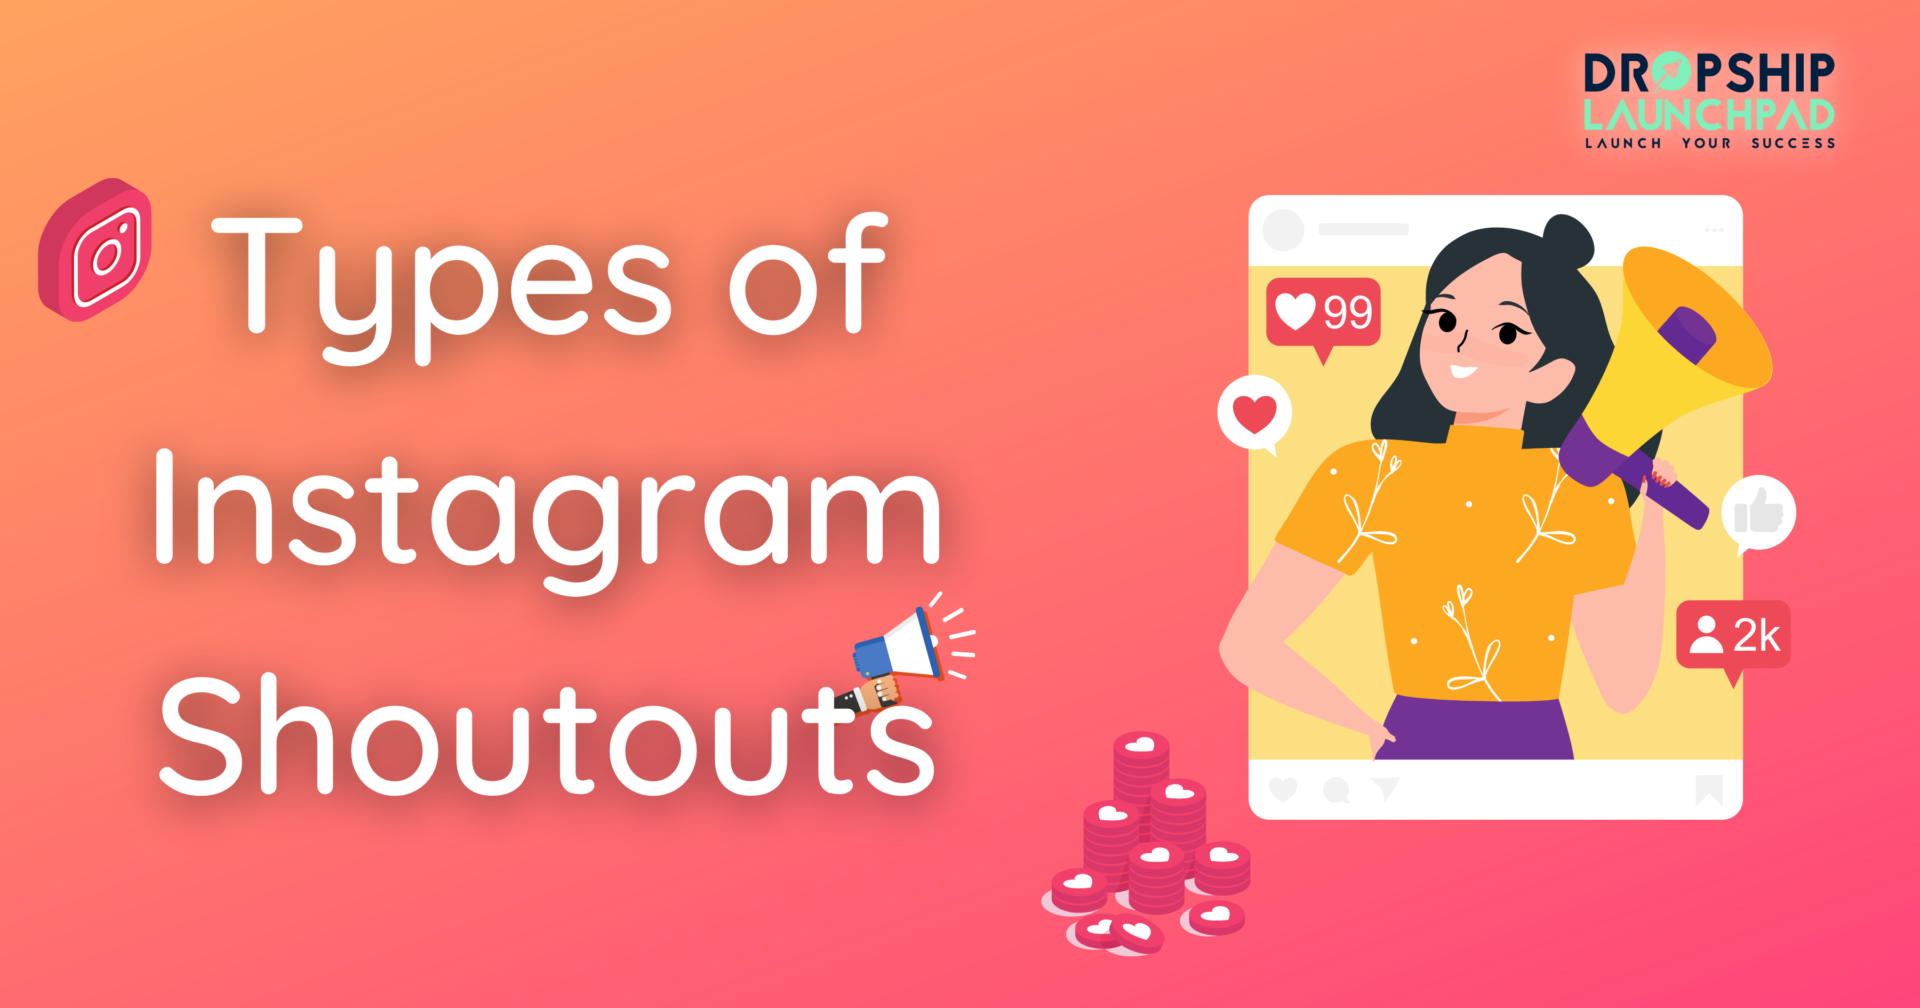 Types of Instagram Shoutouts